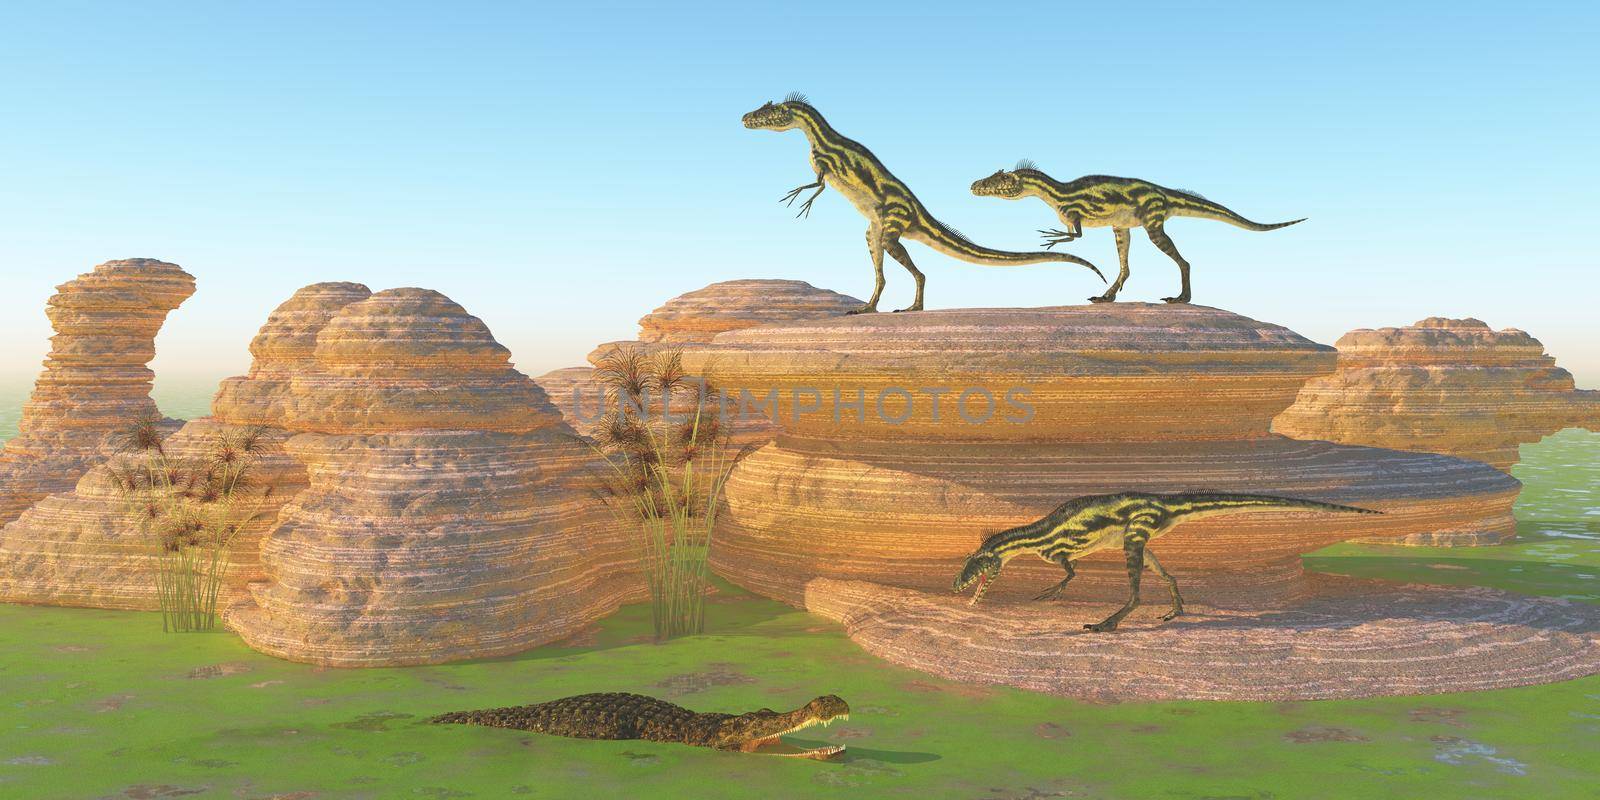 A Sarcosuchus reptile lays in wait for a Deltadromeus dinosaur wanting a drink of water during the Cretaceous Period of Africa.